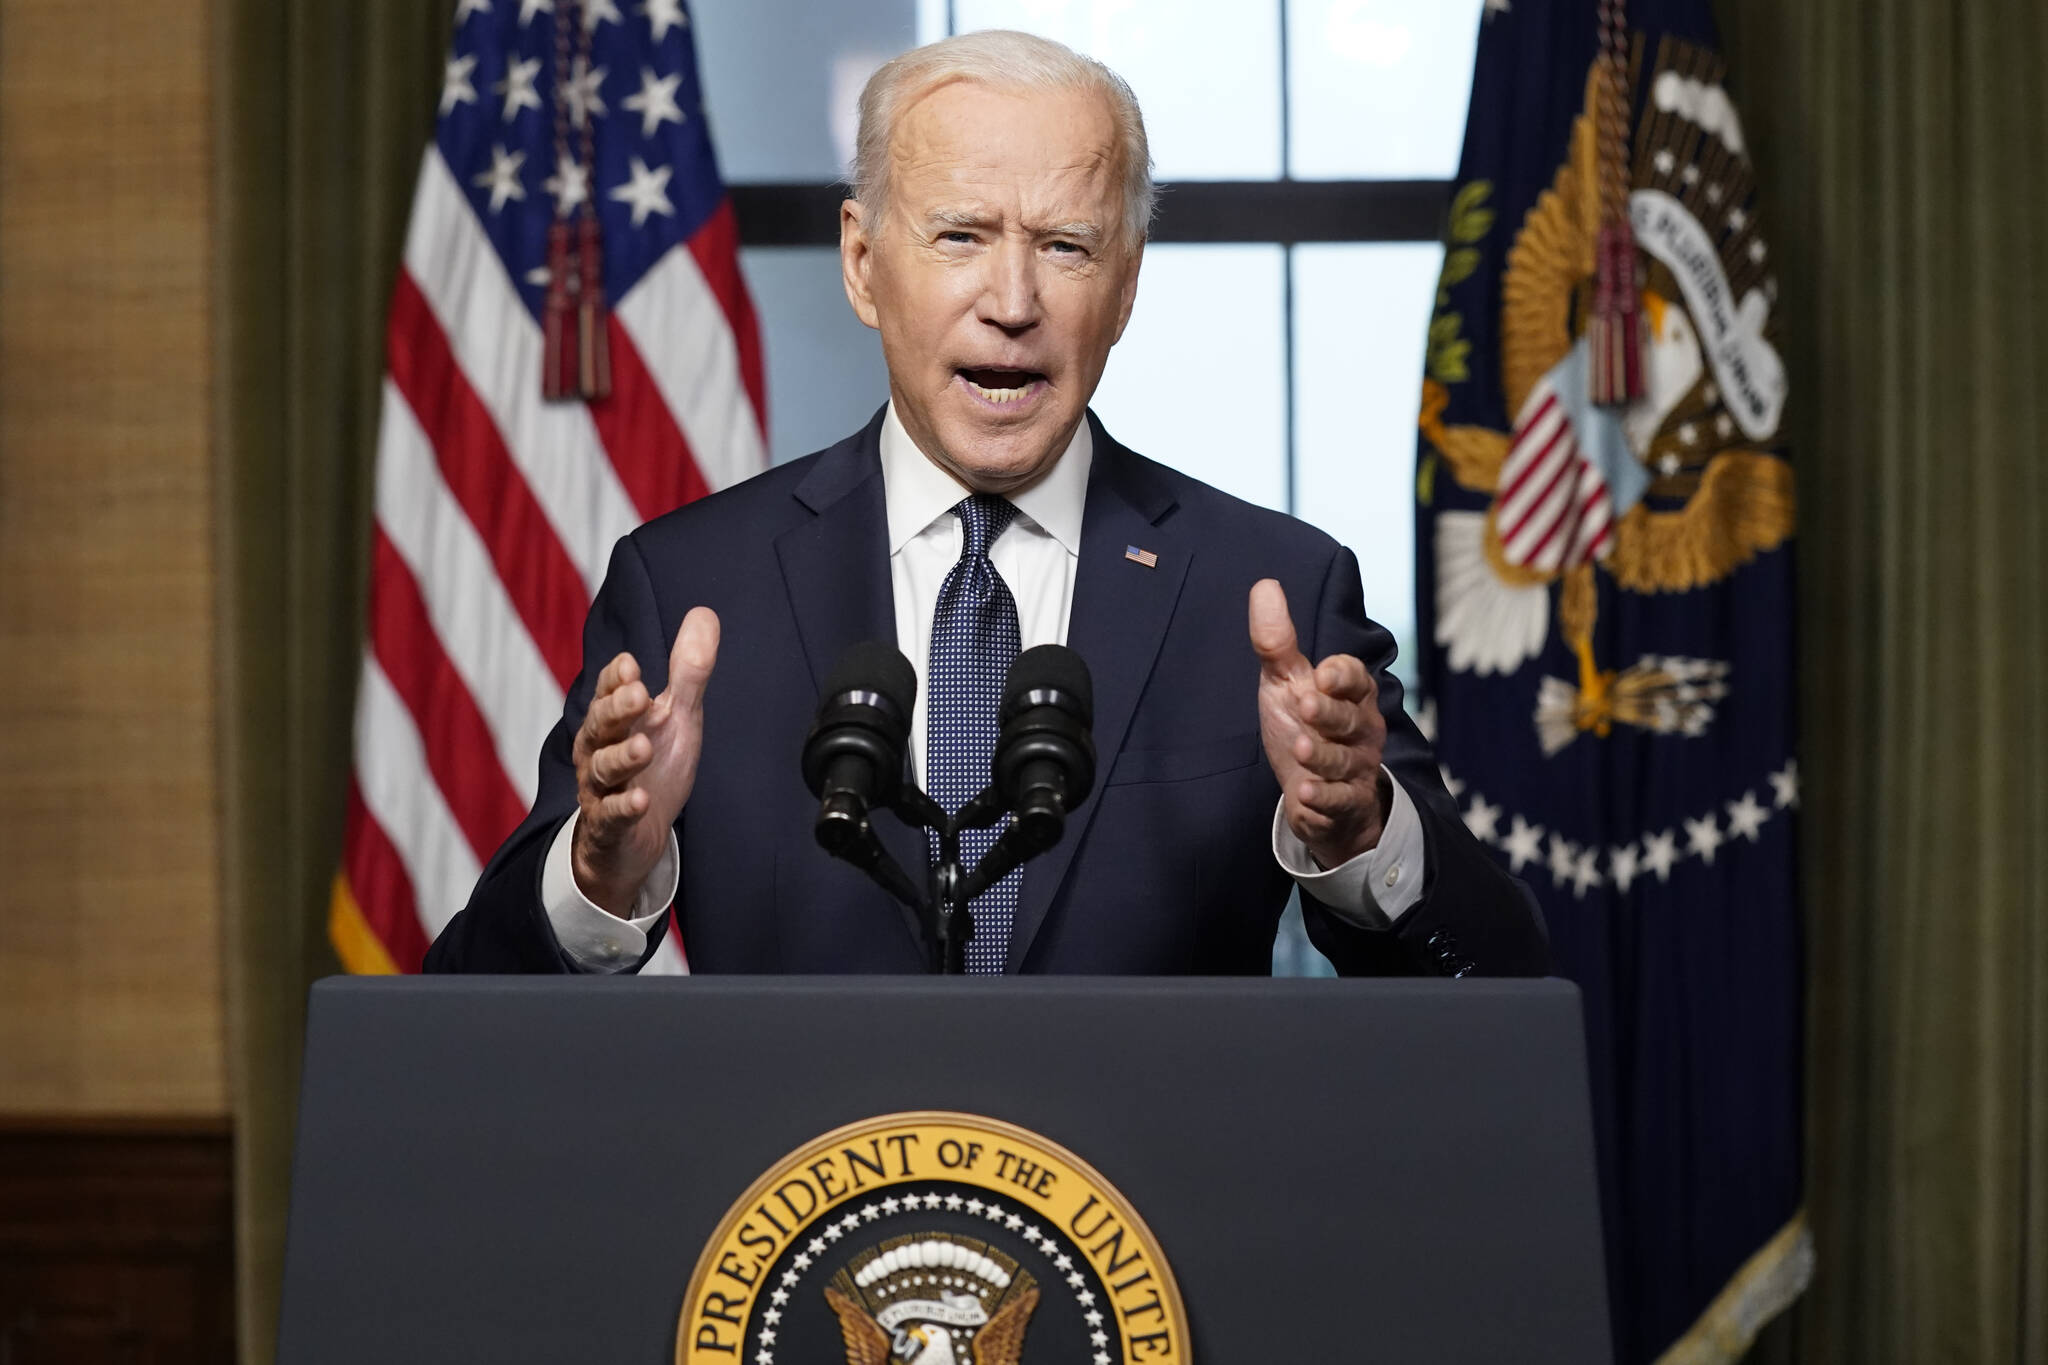 President Joe Biden speaks from the Treaty Room in the White House on April 14, 2021, about the withdrawal of the remainder of U.S. troops from Afghanistan. (AP Photo / Andrew Harnik)